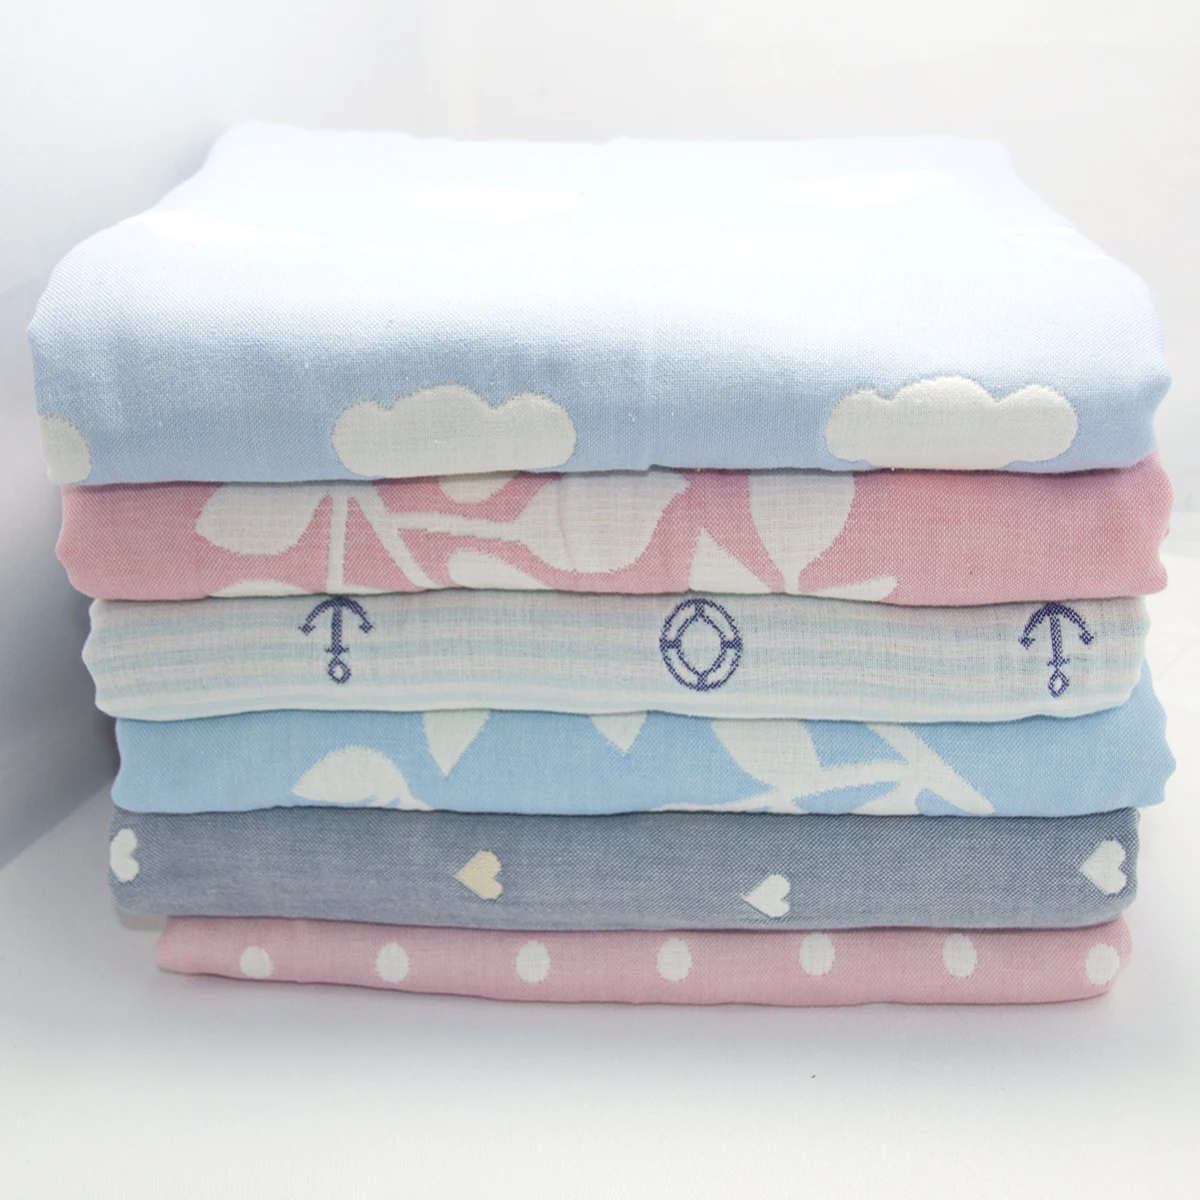 

New Soft Baby Blankets 100% Muslin Cotton 6 Layers Newborn Swaddling Four Seasons Baby Swaddle Bedding Receiving Blanket 2 size